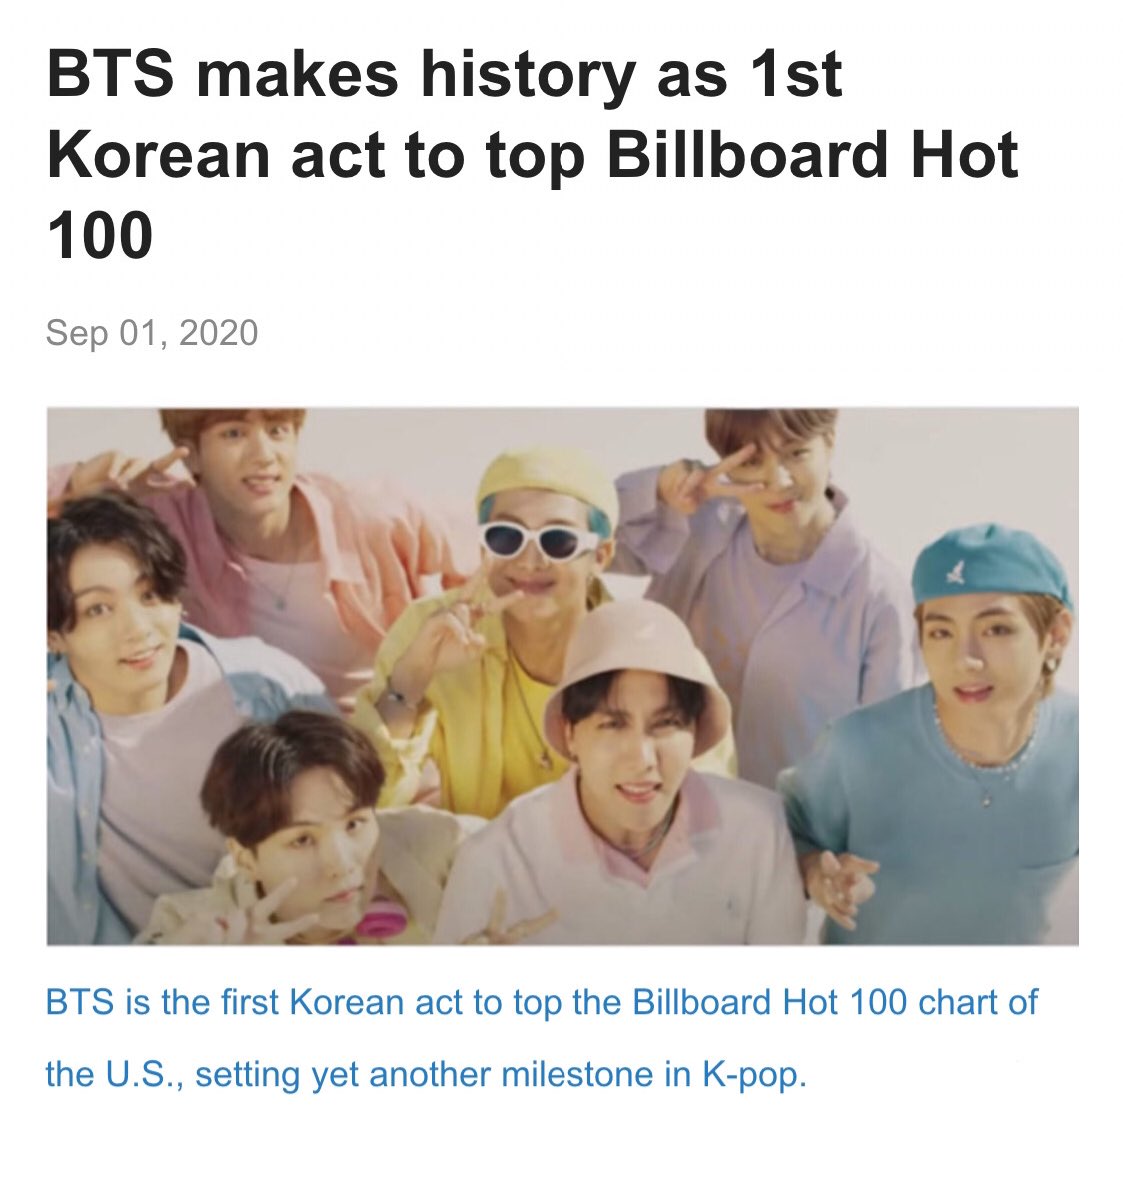 in 2020 BTS became the first korean act to chart #1 on billboard hot100